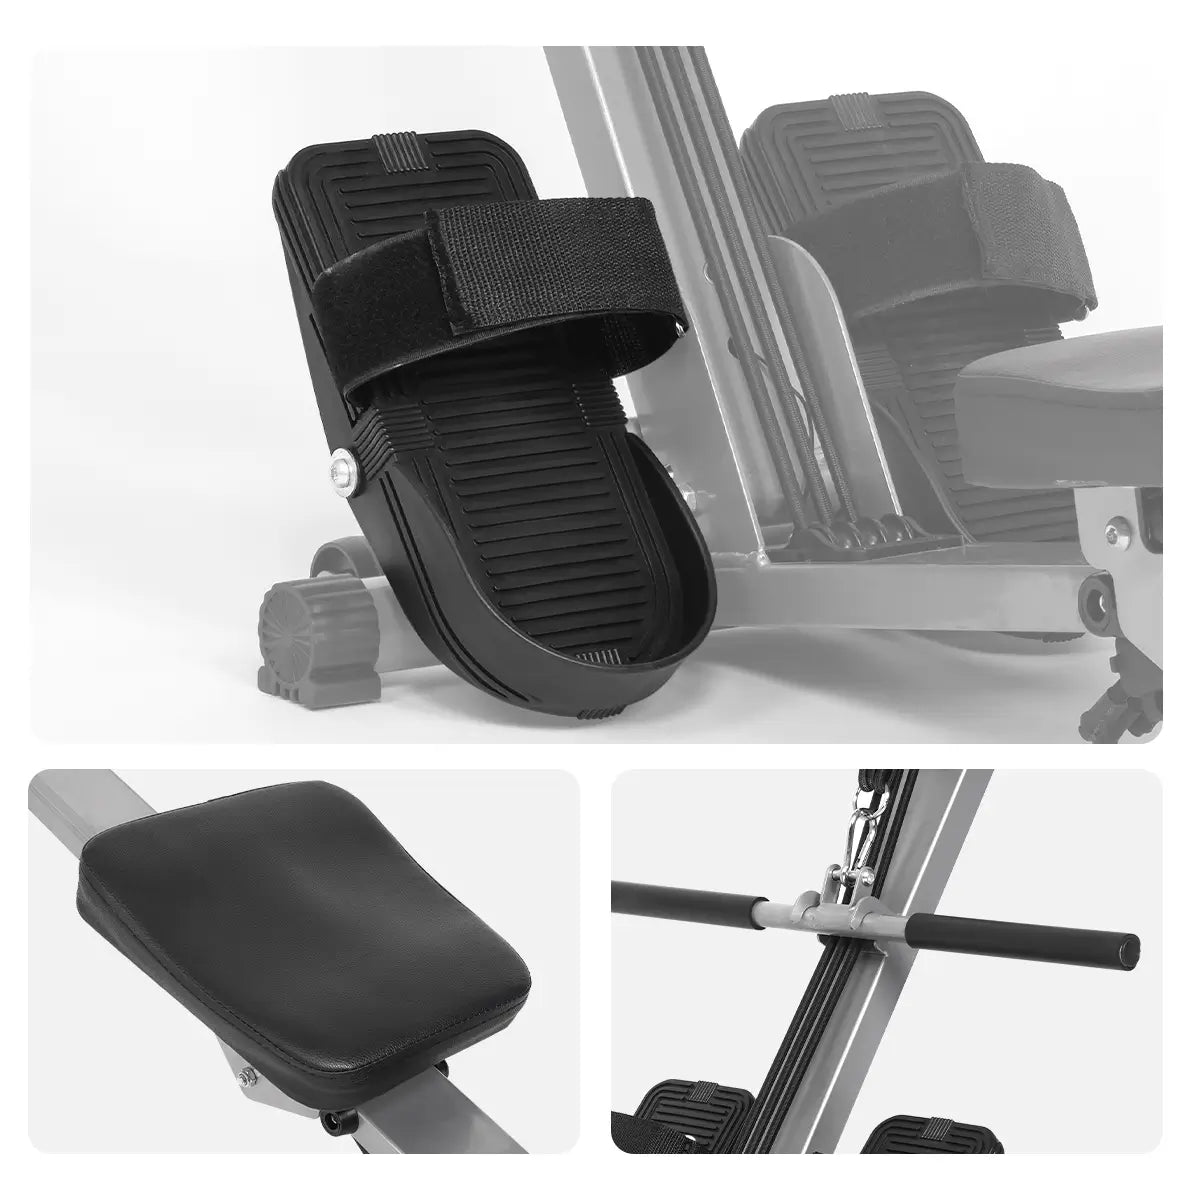 Tousains foldale rowing machine with  non-slip widened pedal and comfort cushion 